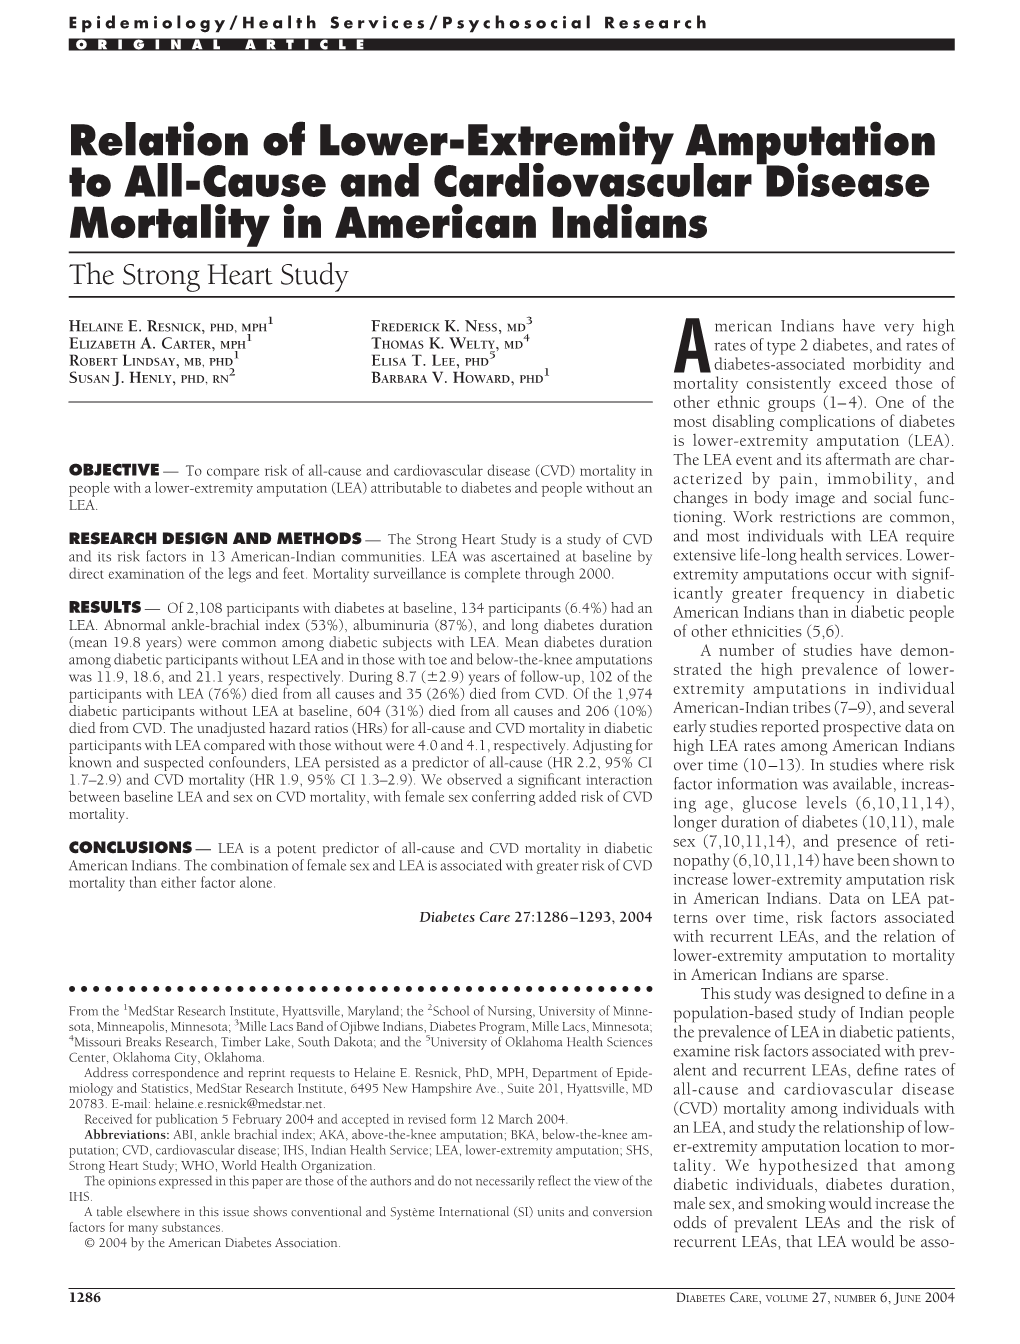 Relation of Lower-Extremity Amputation to All-Cause and Cardiovascular Disease Mortality in American Indians the Strong Heart Study